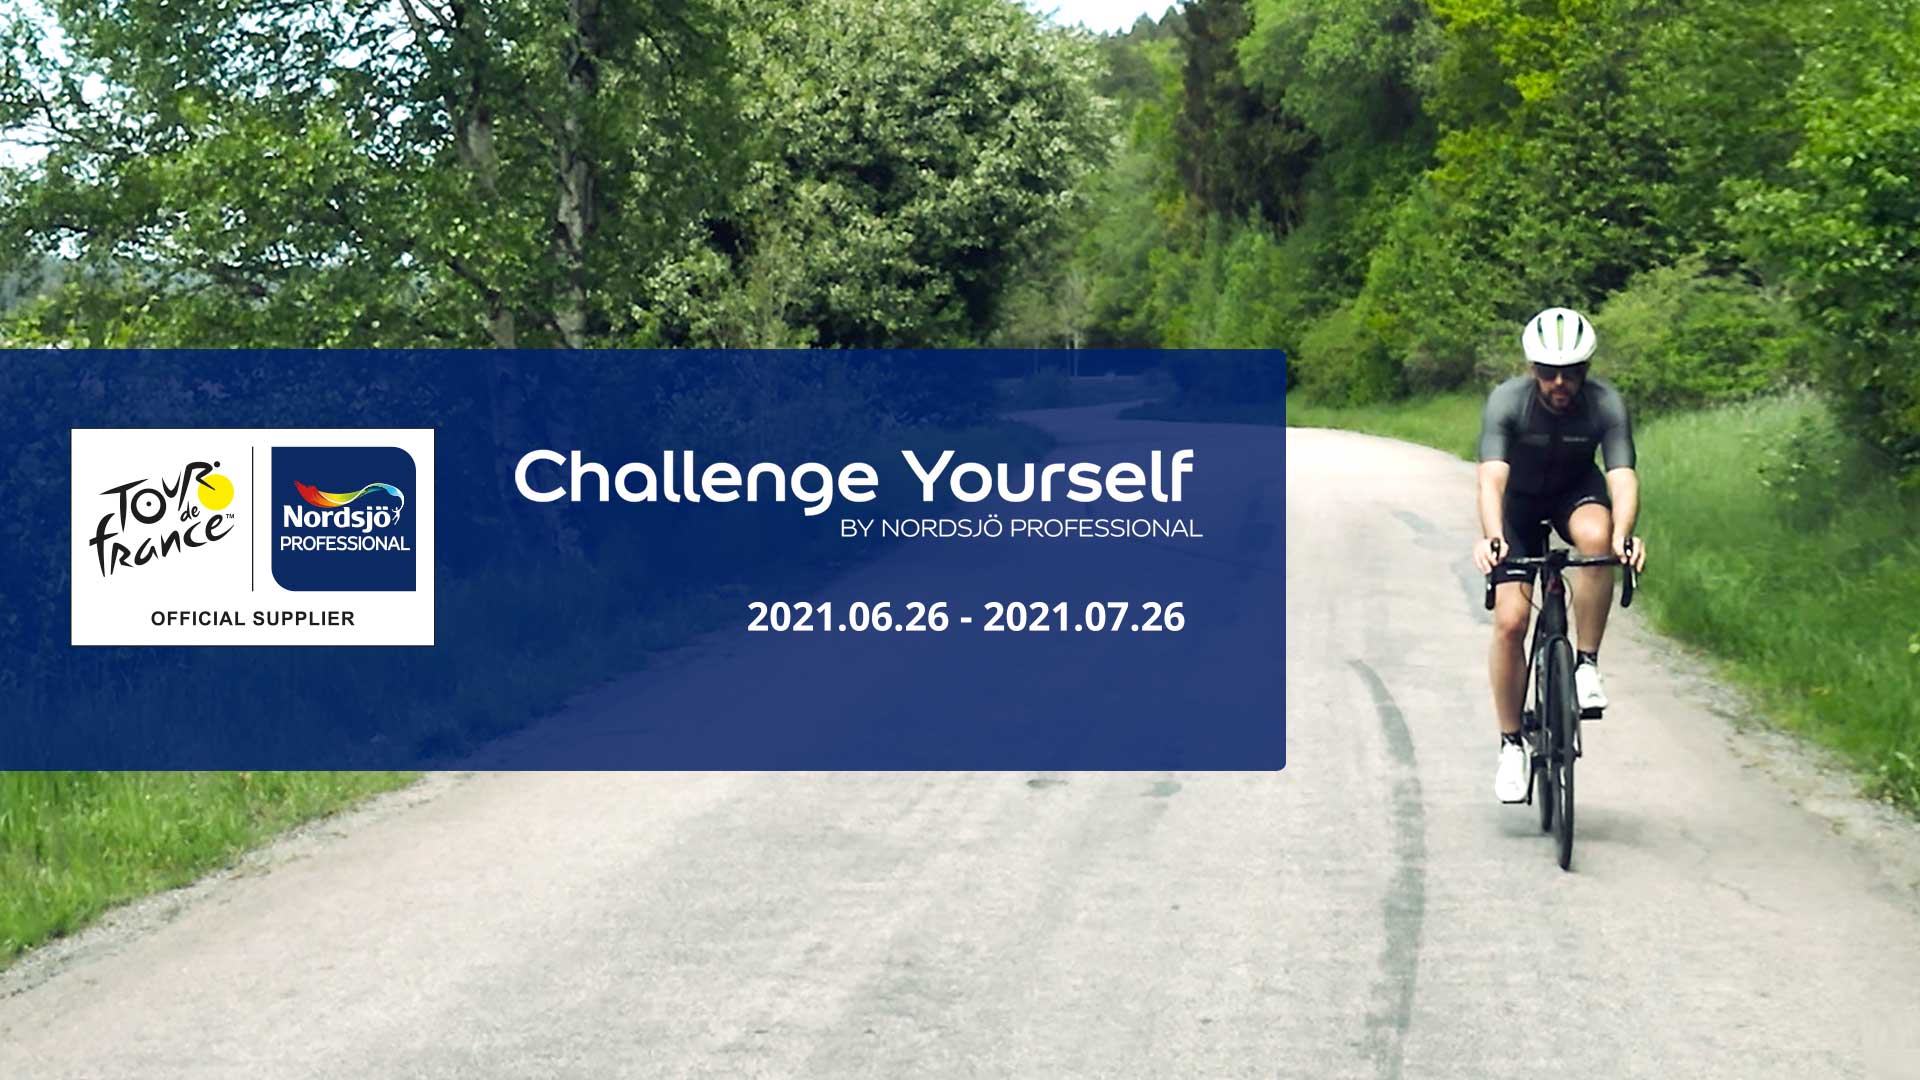 Challenge yourself by Nordsjö Professional 25/7